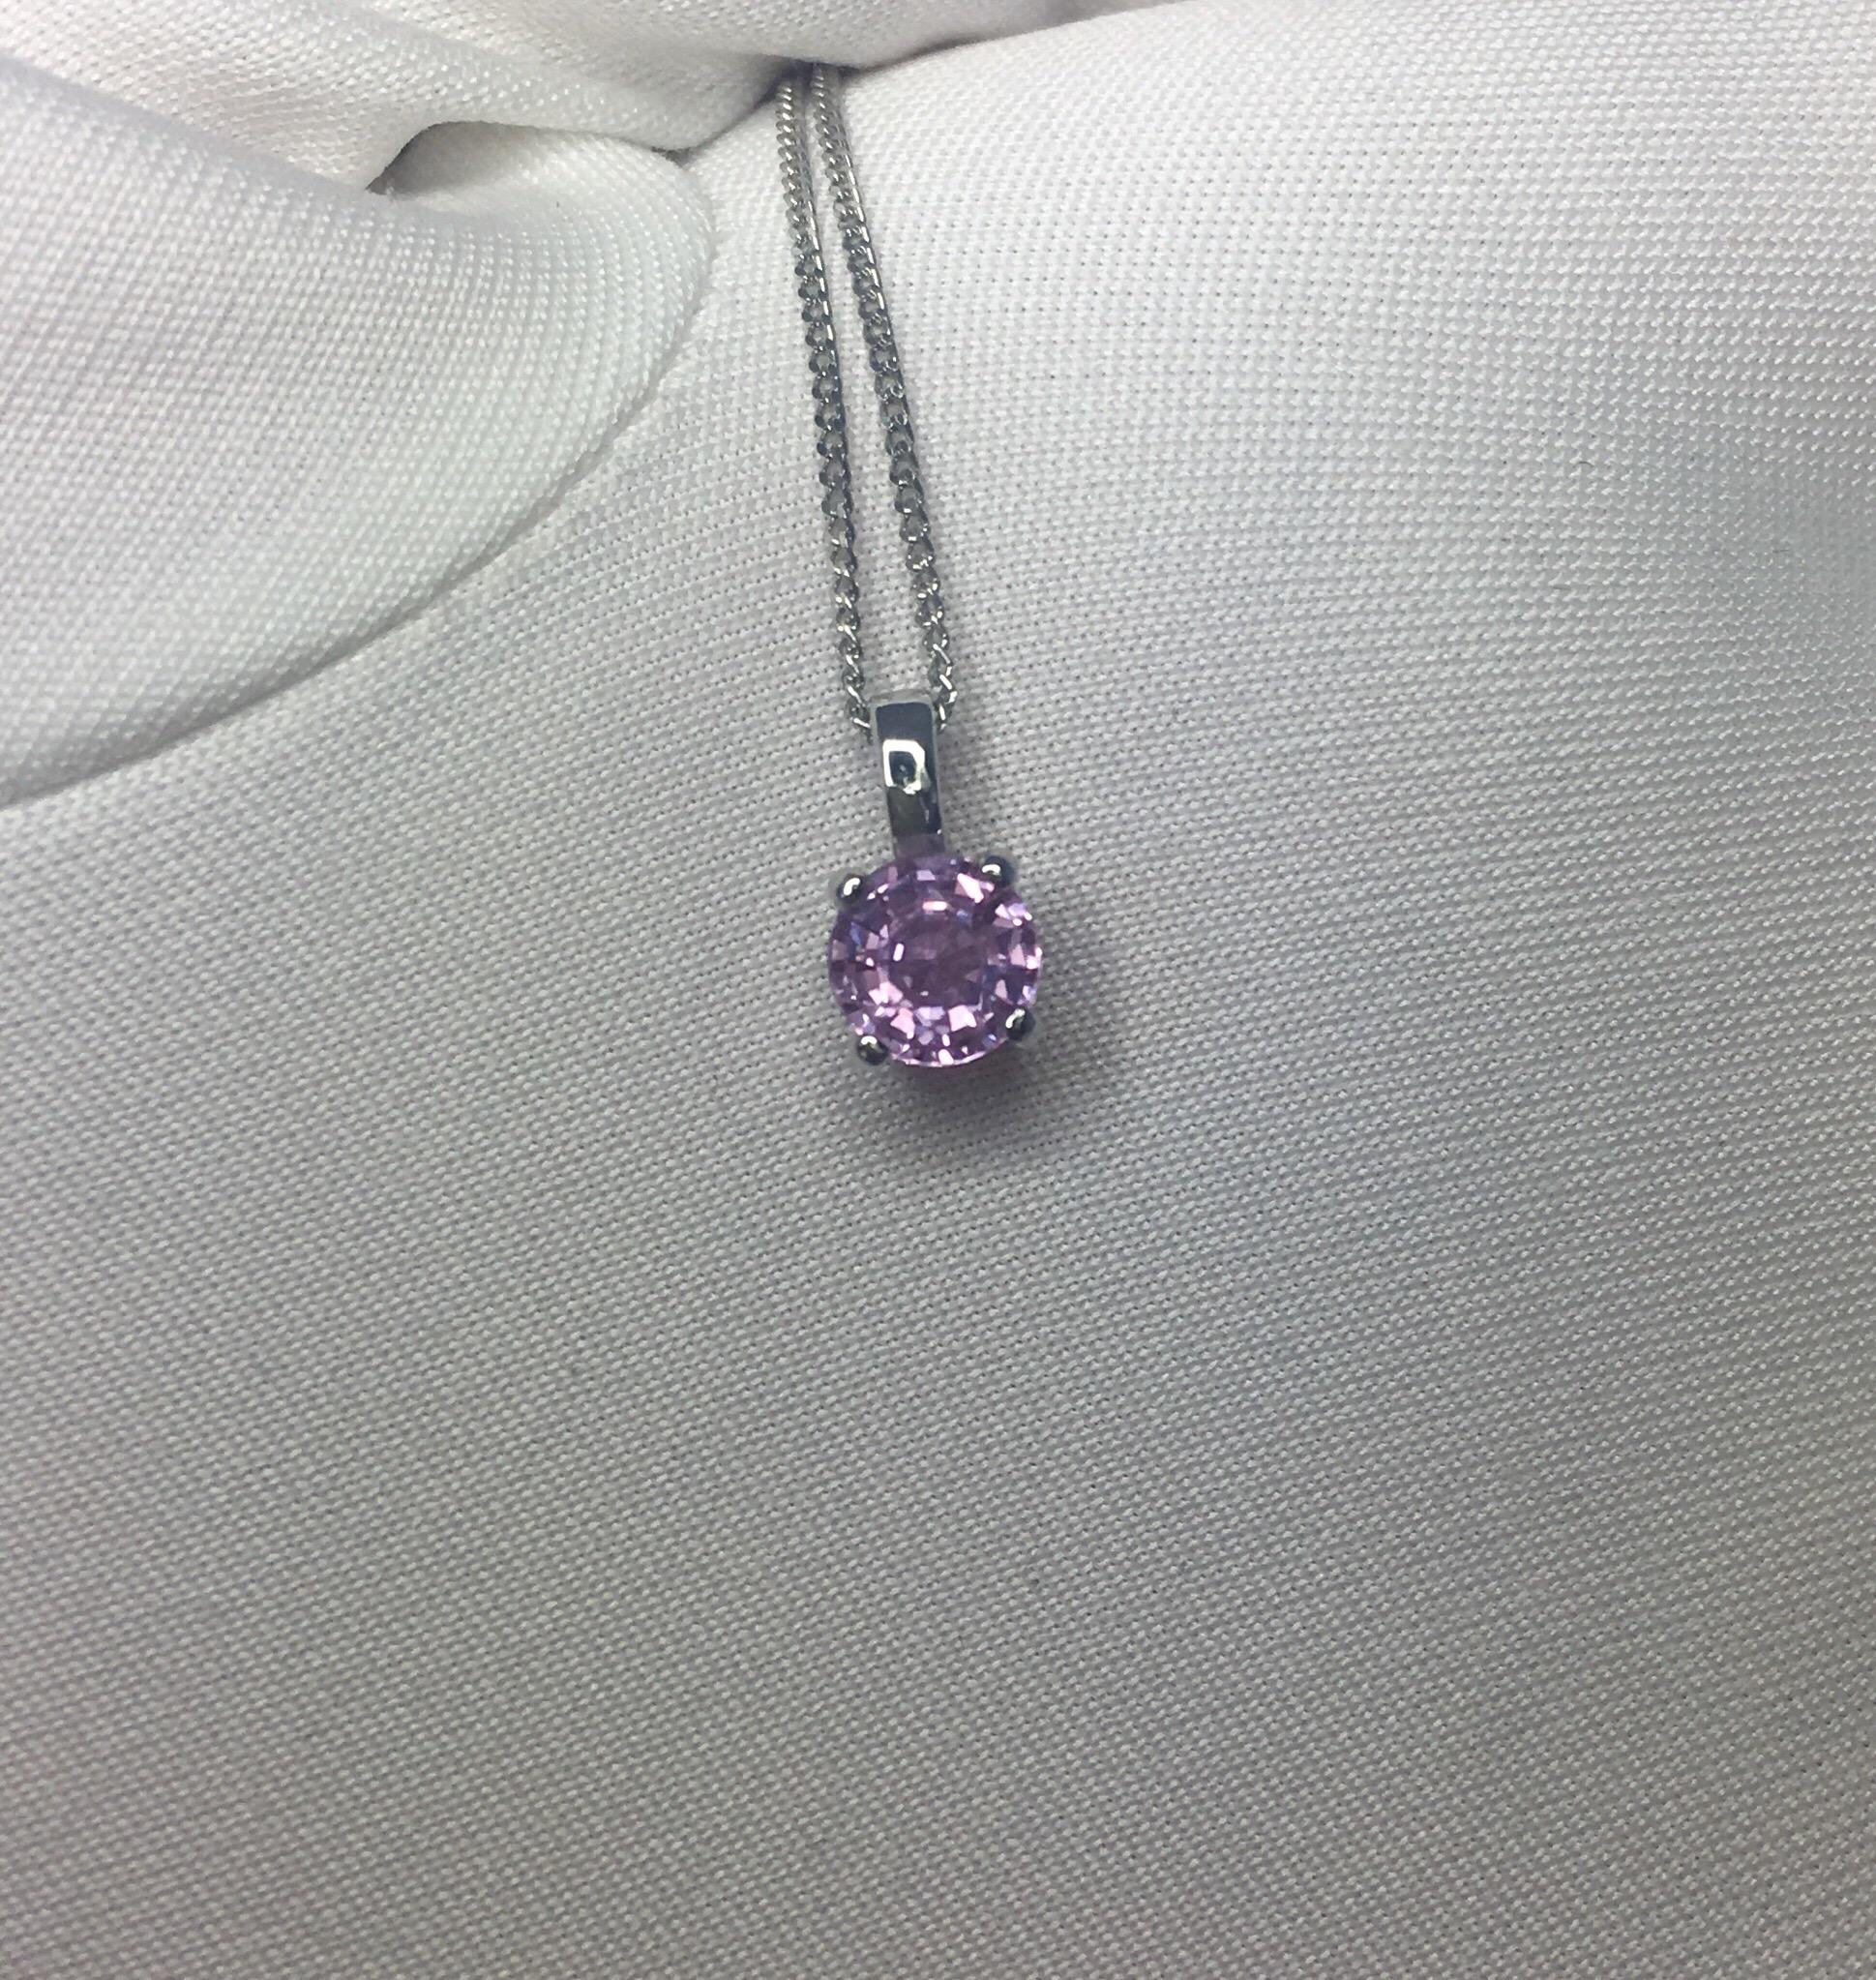 Natural vivid pinkish purple unheated sapphire solitaire pendant.

Beautiful round cut Sapphire. Set in a fine platinum pendant setting.

0.61 carat stone with a vivid pinkish purple colour and very good clarity.

The pendant is hanging on a 16